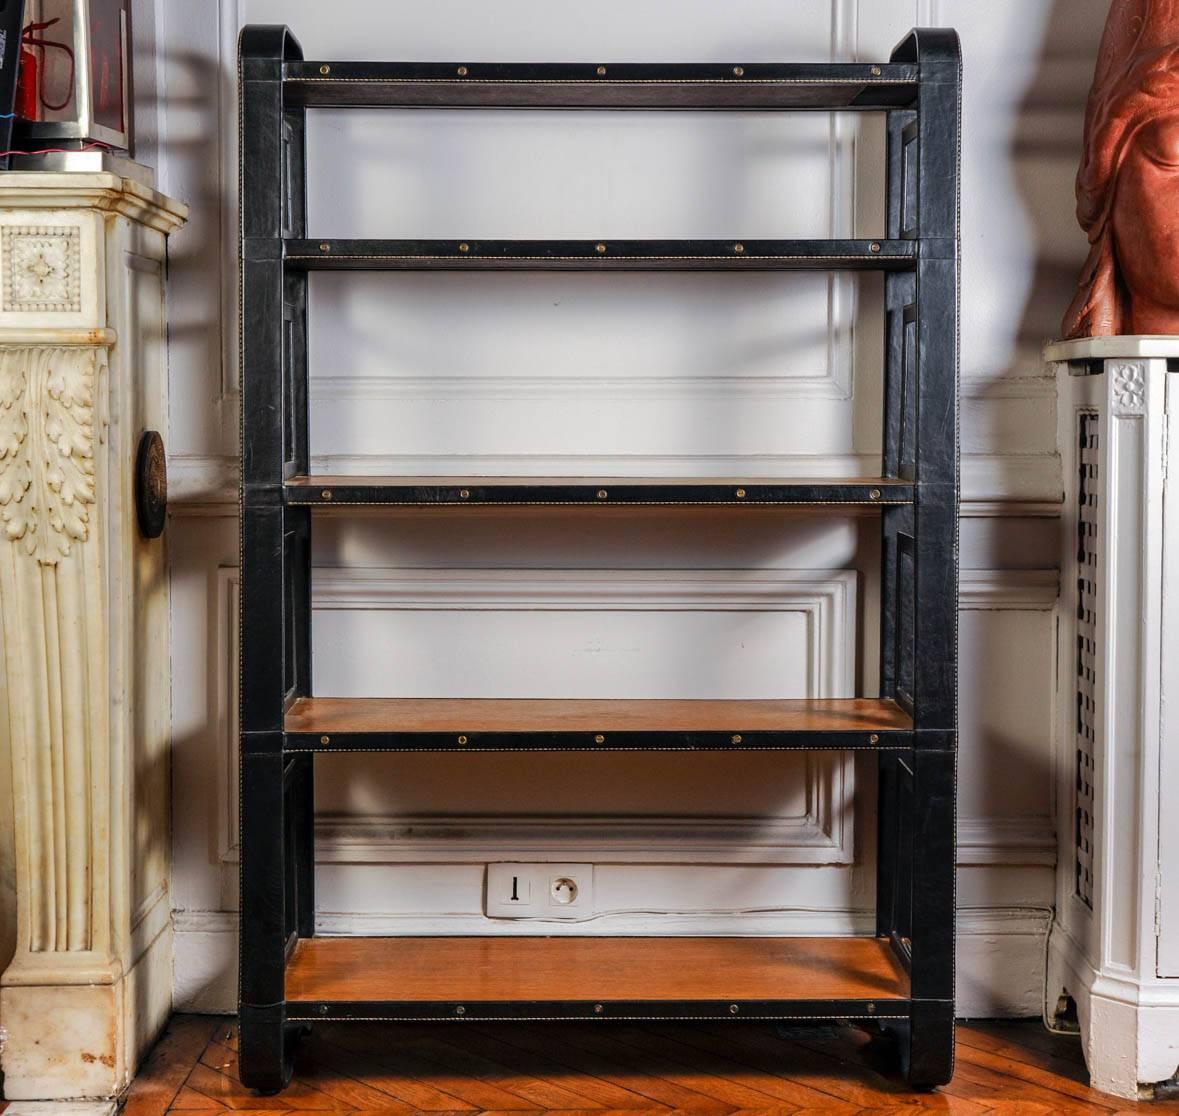 Black leather bookcase with oak shelves
perfect condition.